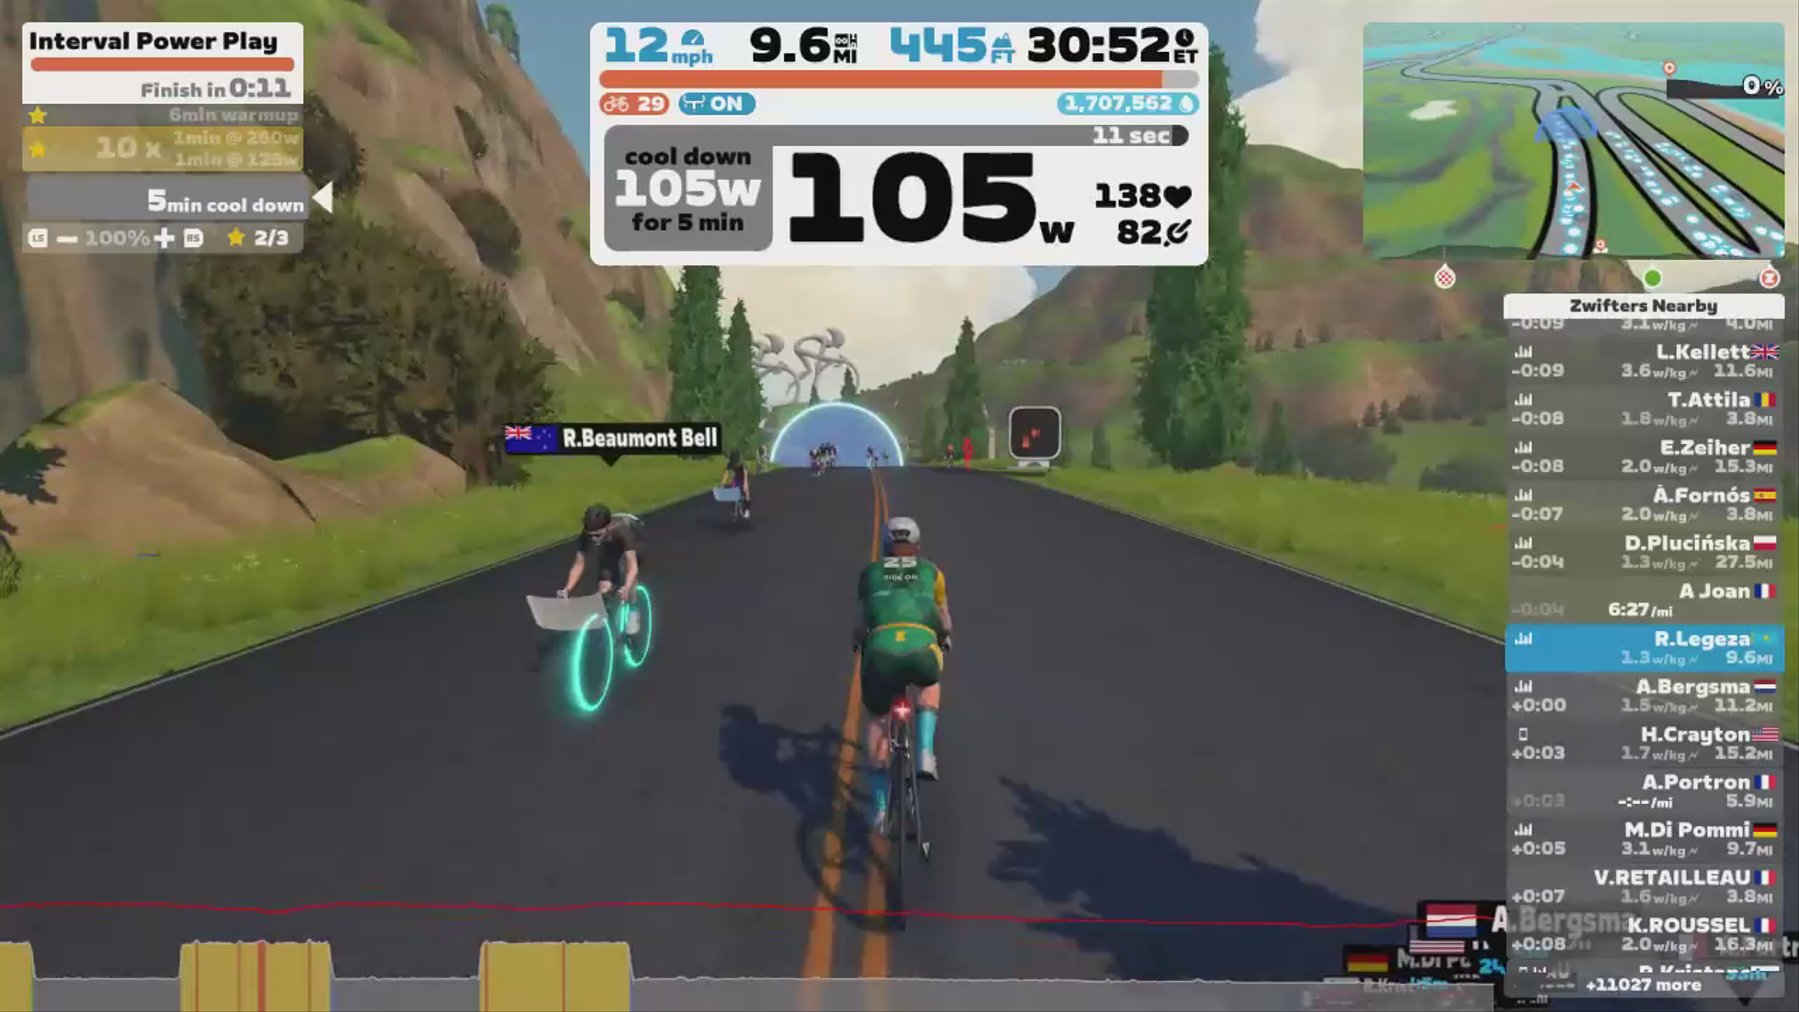 Zwift - Interval Power Play in Watopia